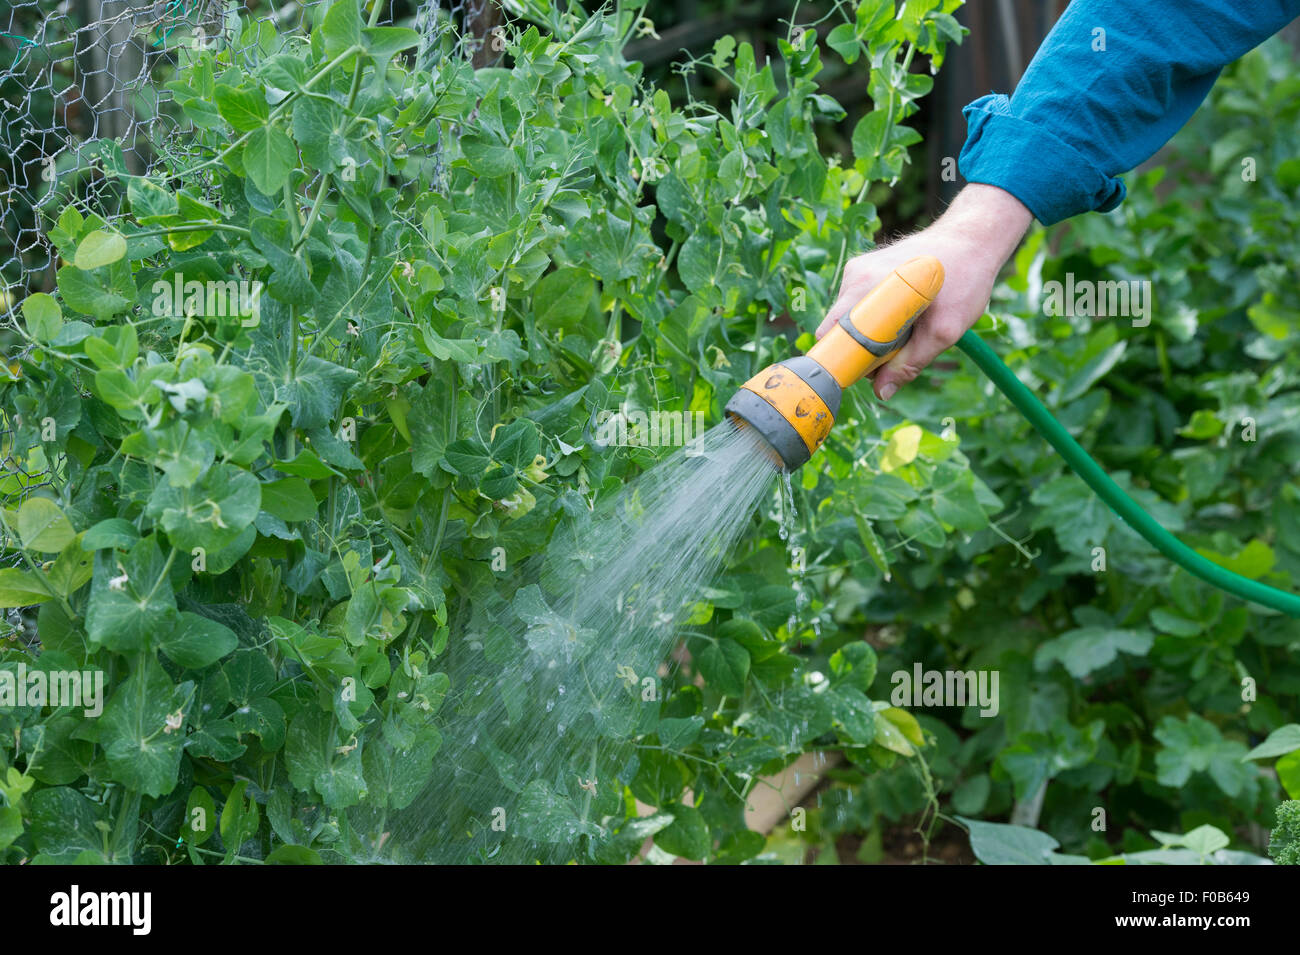 Watering mangetout with a hosepipe in a vegetable garden Stock Photo